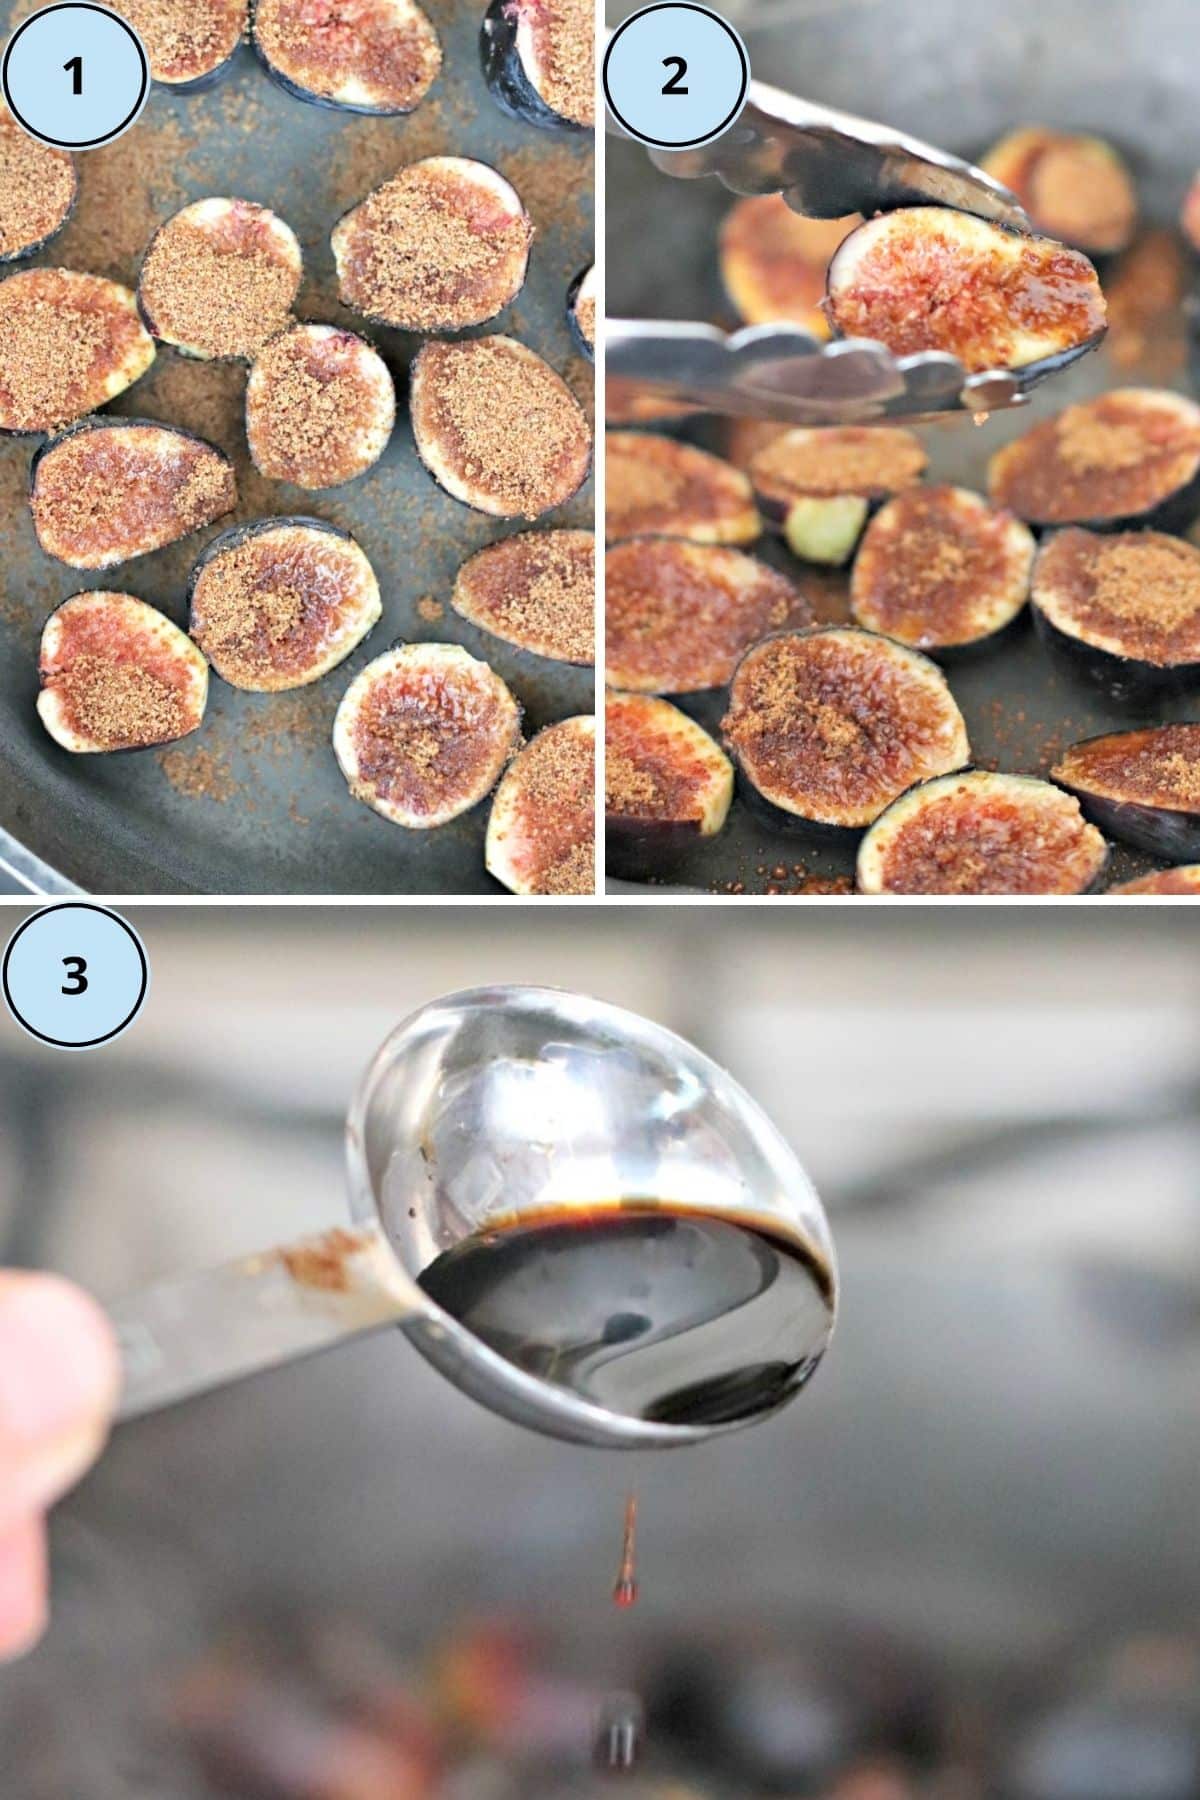 Collage of 3 images showing the steps for making this recipe